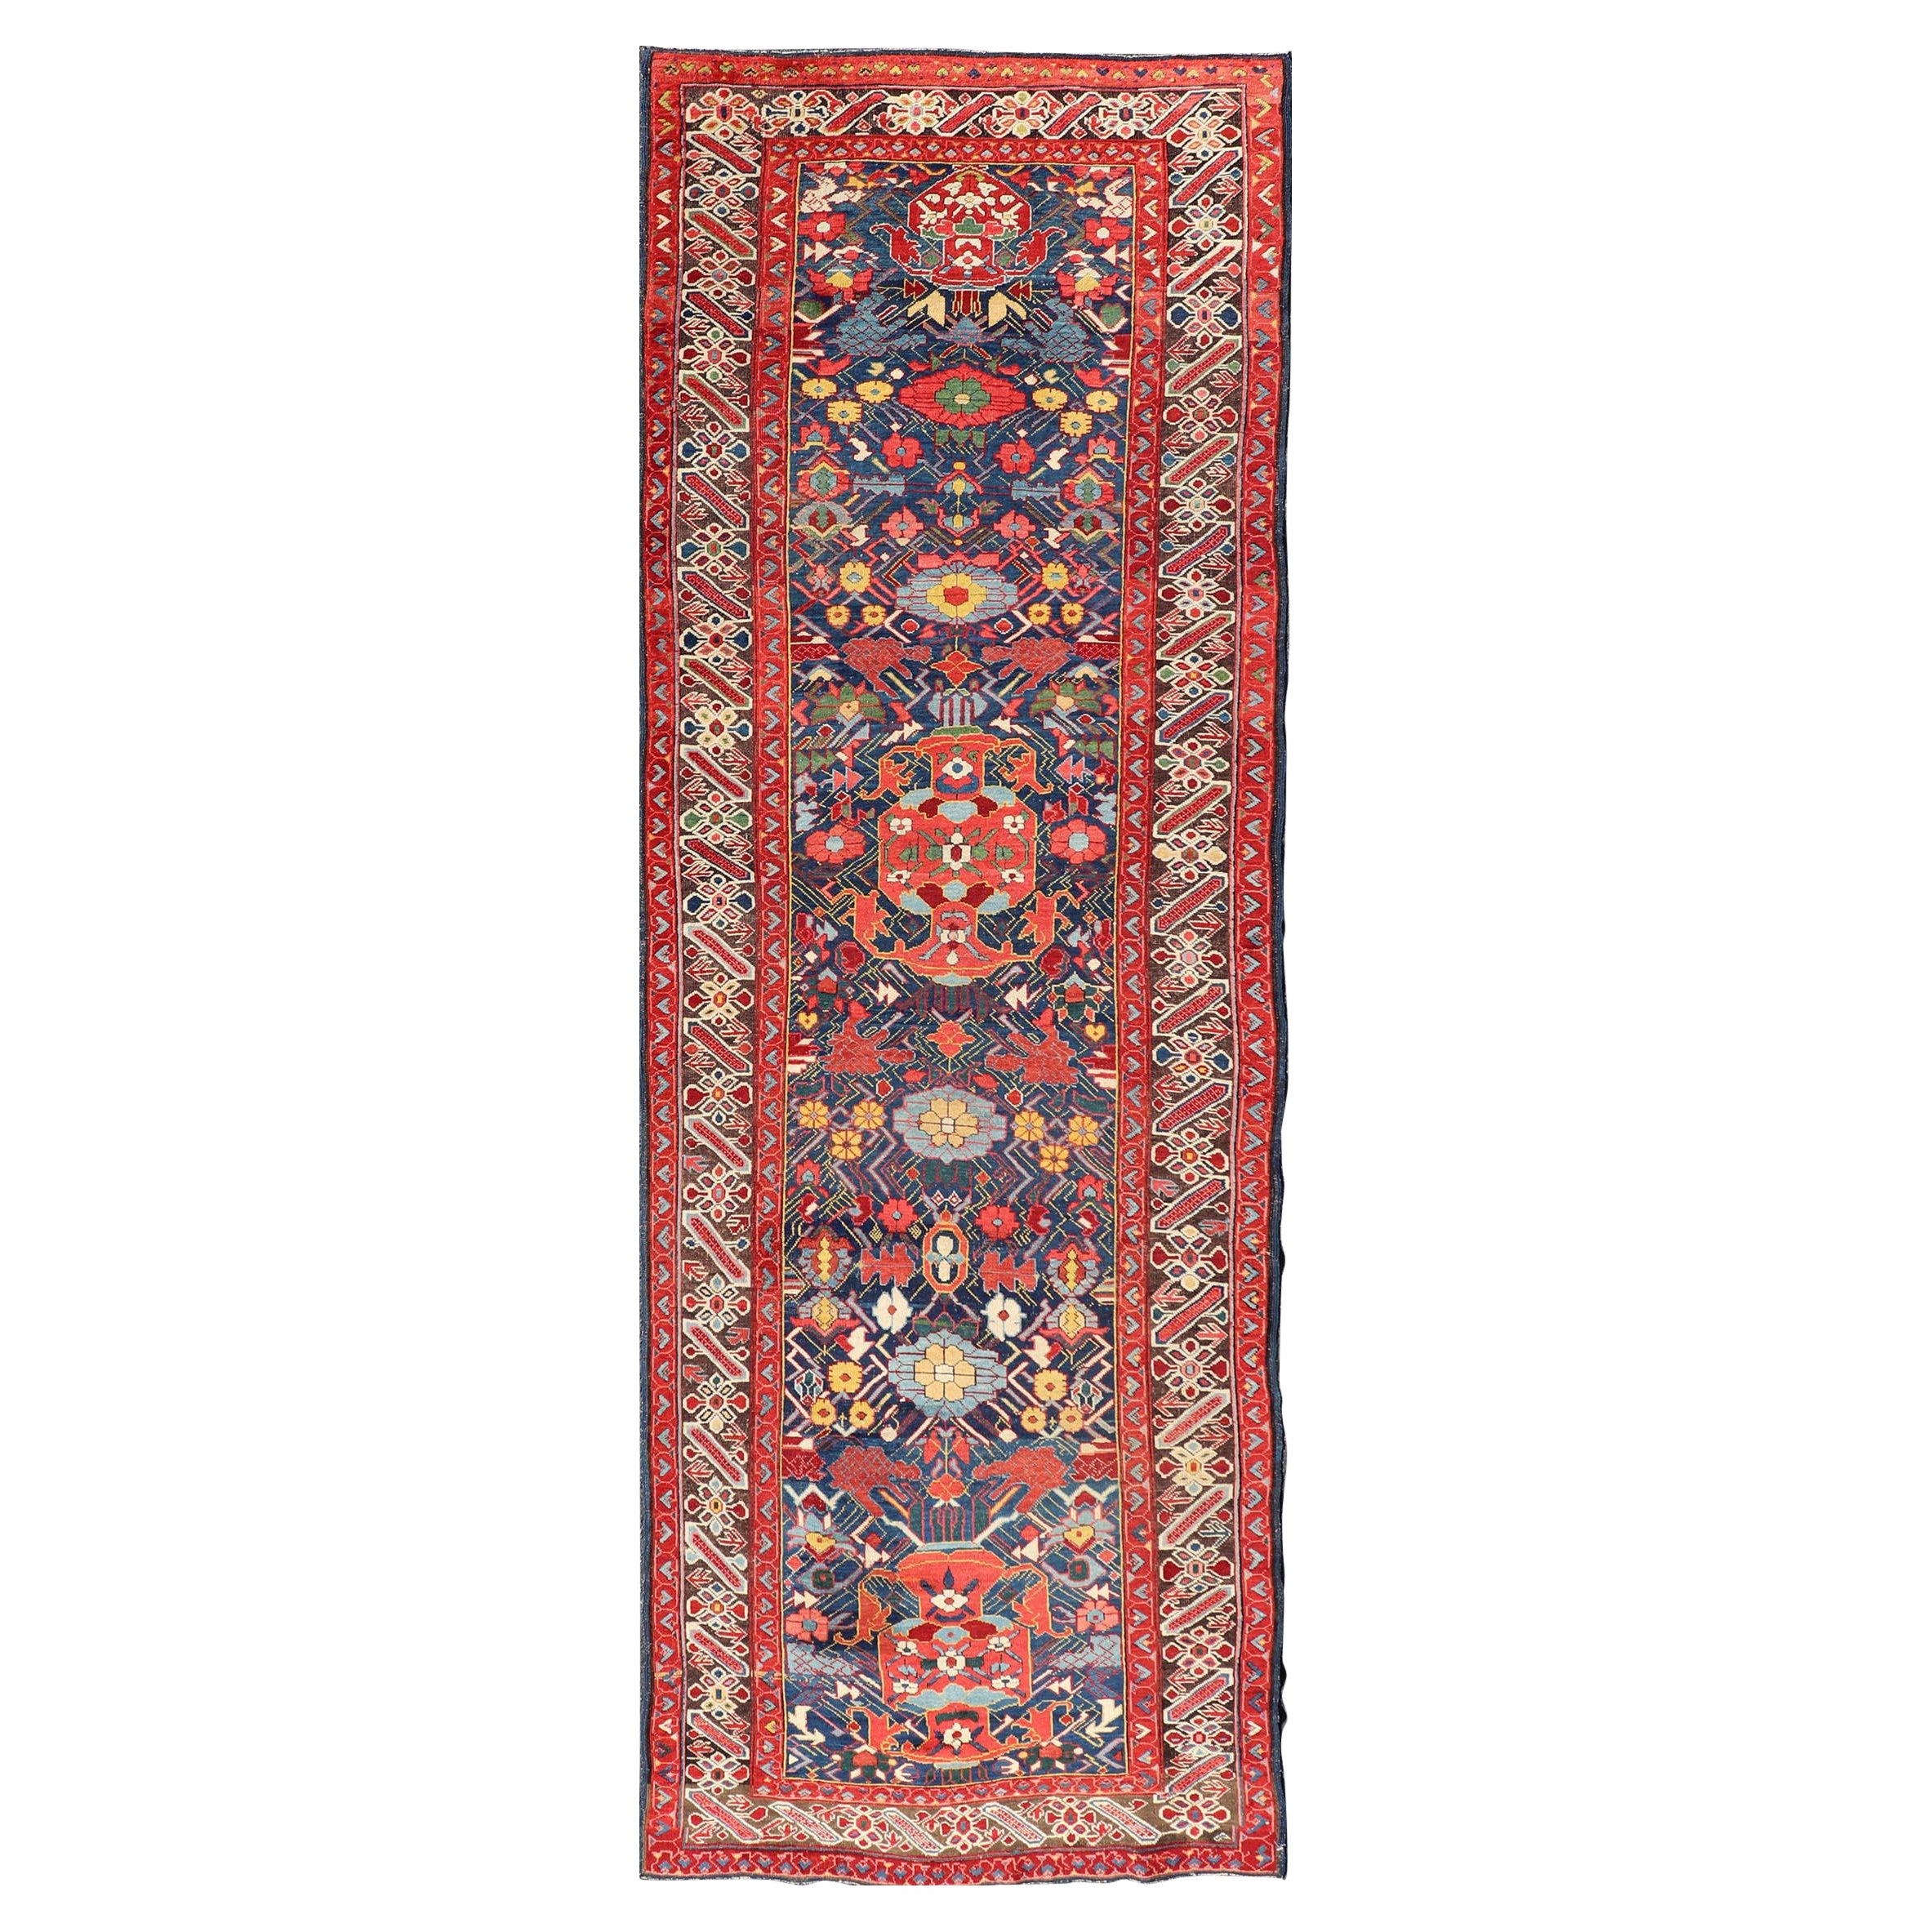 Antique Caucasian Kuba Runner with Intricate and Complex Design 